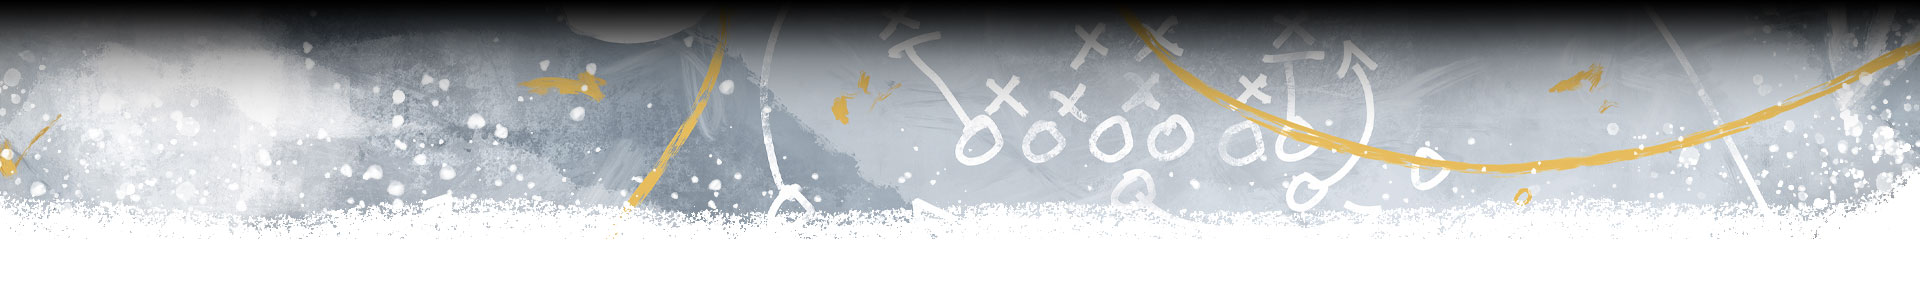 A decorative image of American football strategy drawings. 